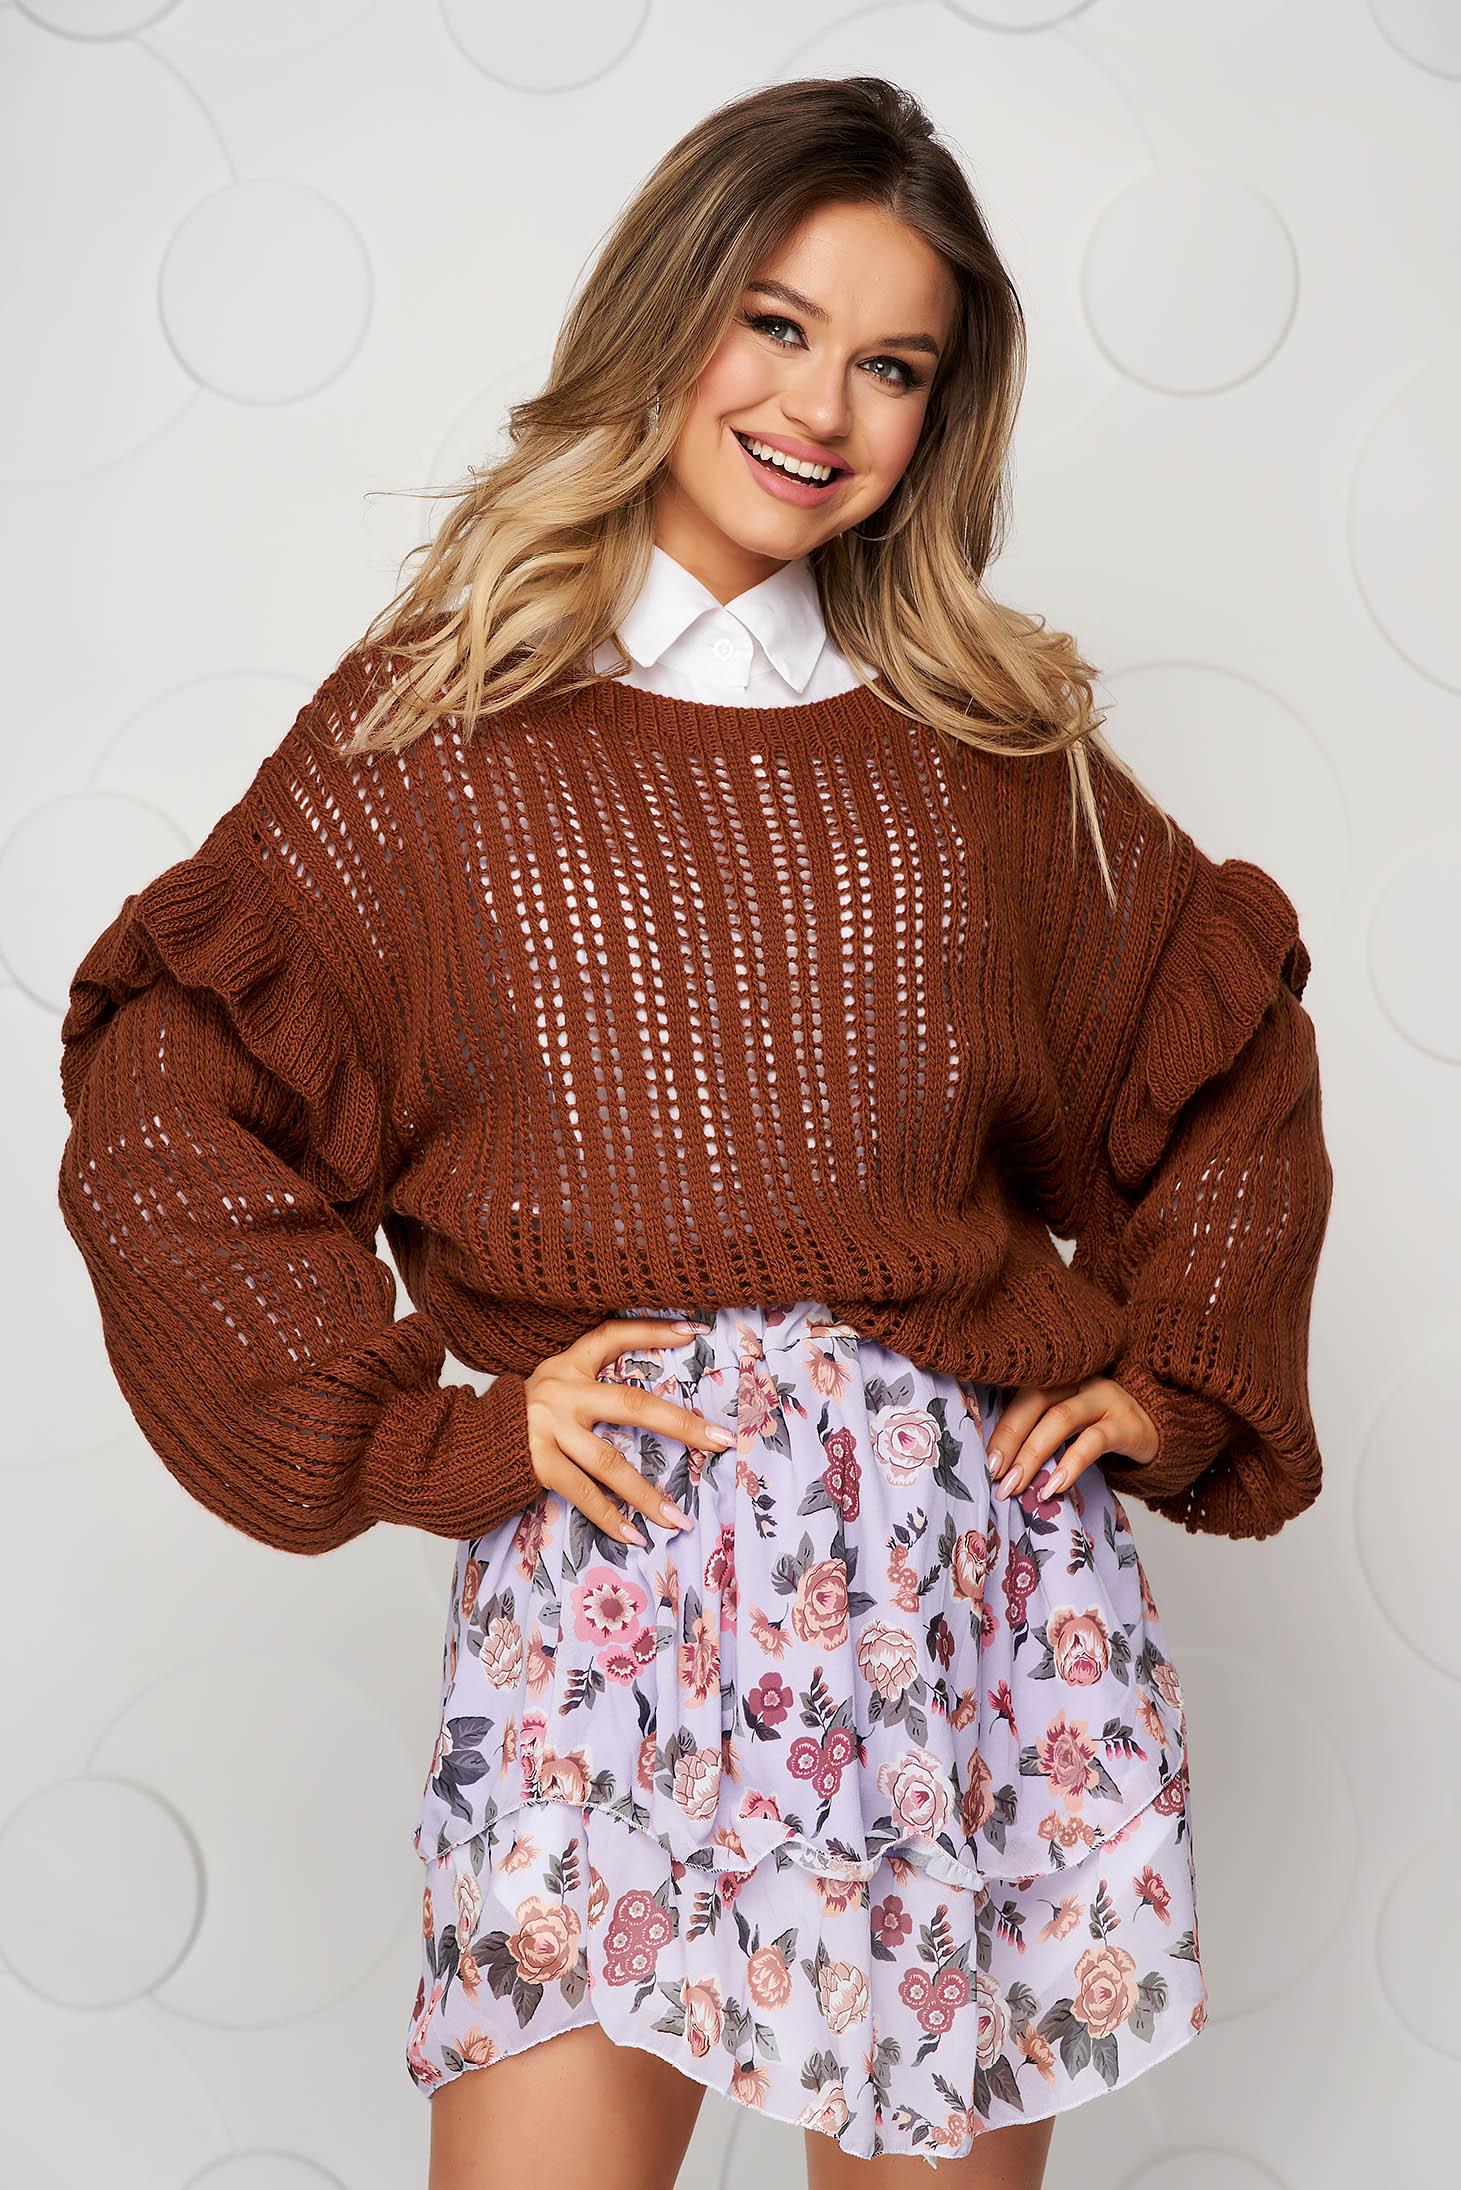 Knitted brown sweater transparent fabric with ruffle details loose fit 1 - StarShinerS.com